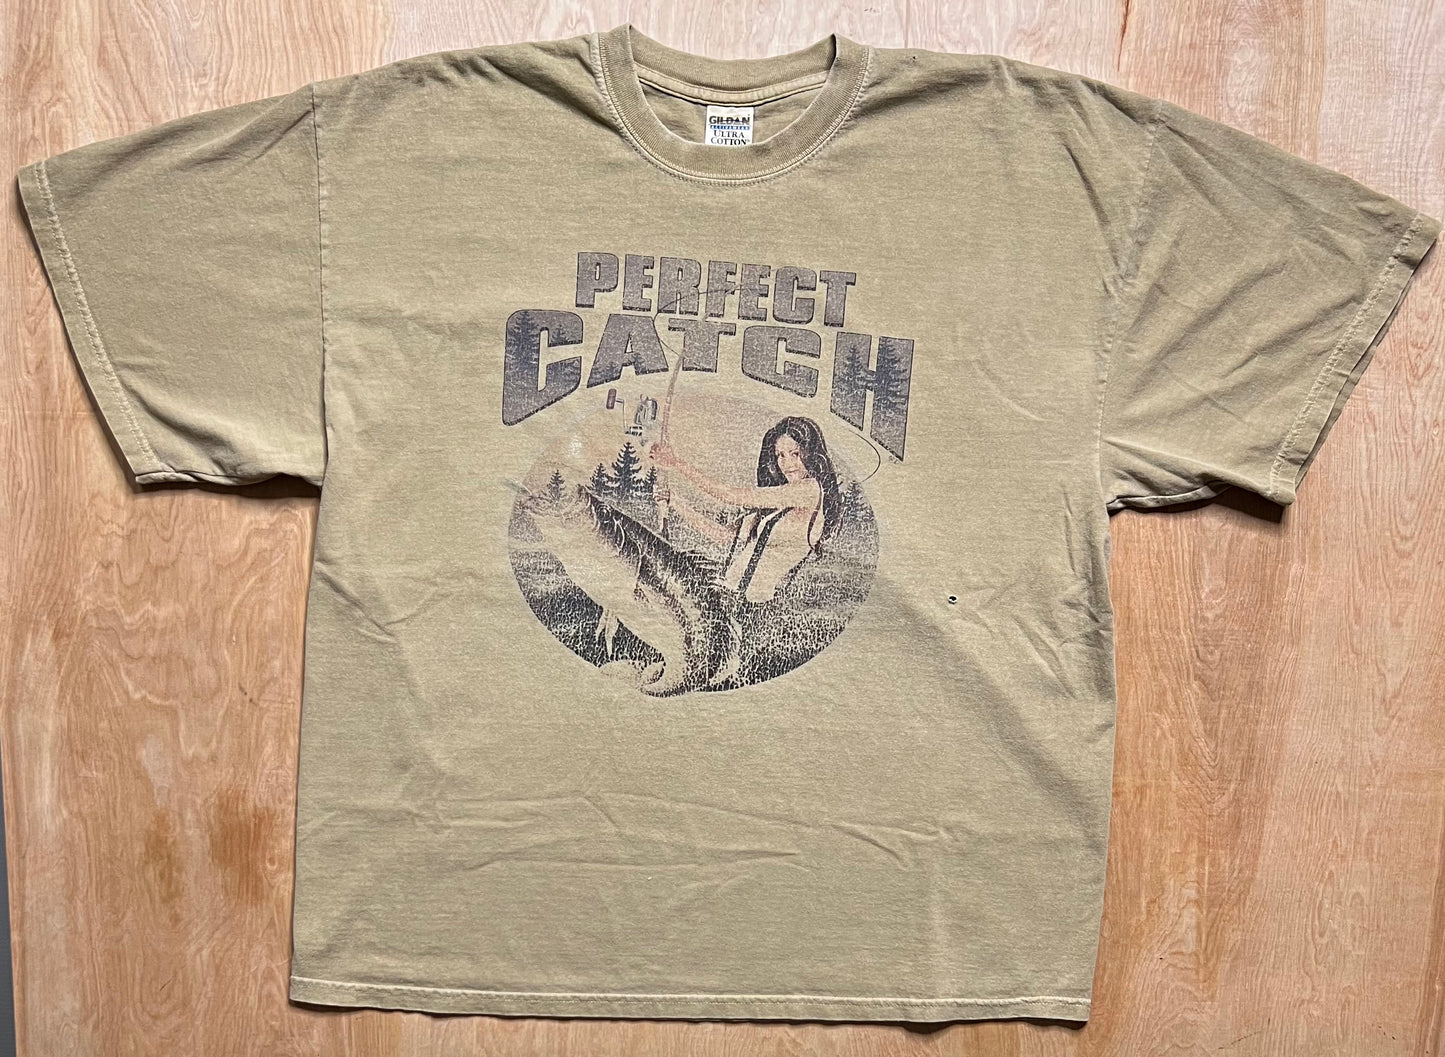 Vintage "Perfect Catch" Distressed T-Shirt